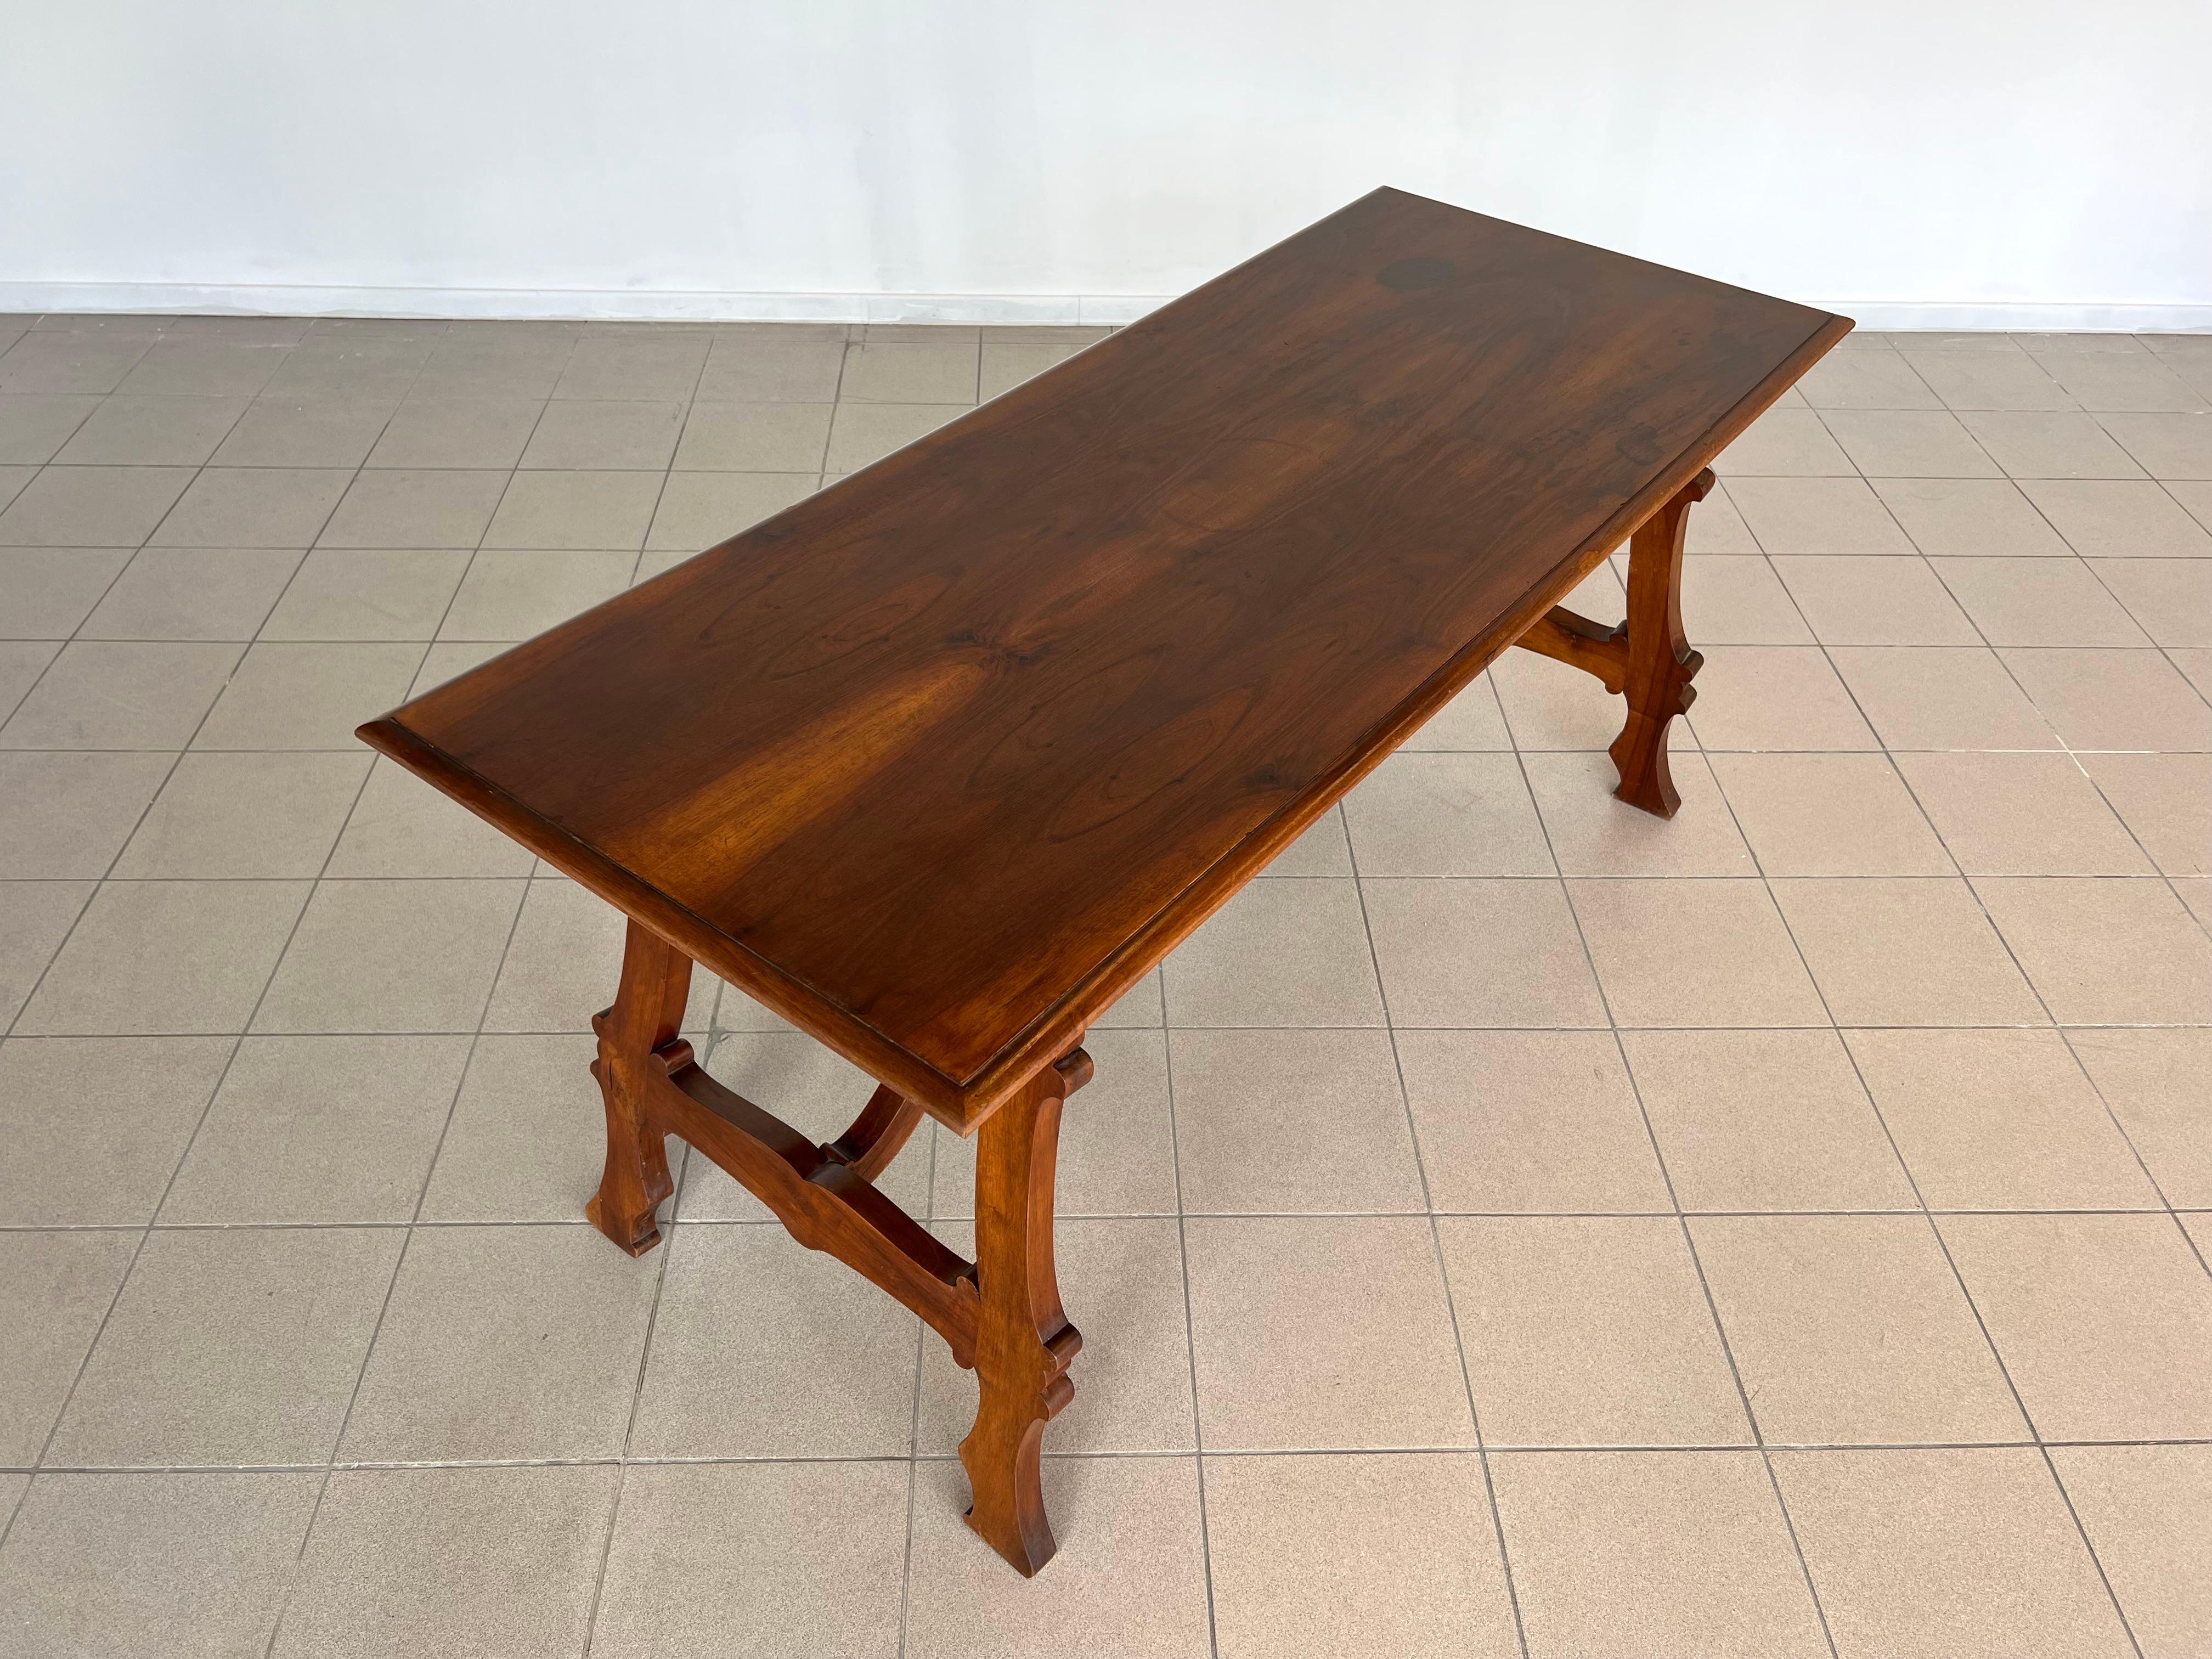 Italian Tuscan Renaissance Refectory Hand Crafted Walnut Dining Table For Sale 3